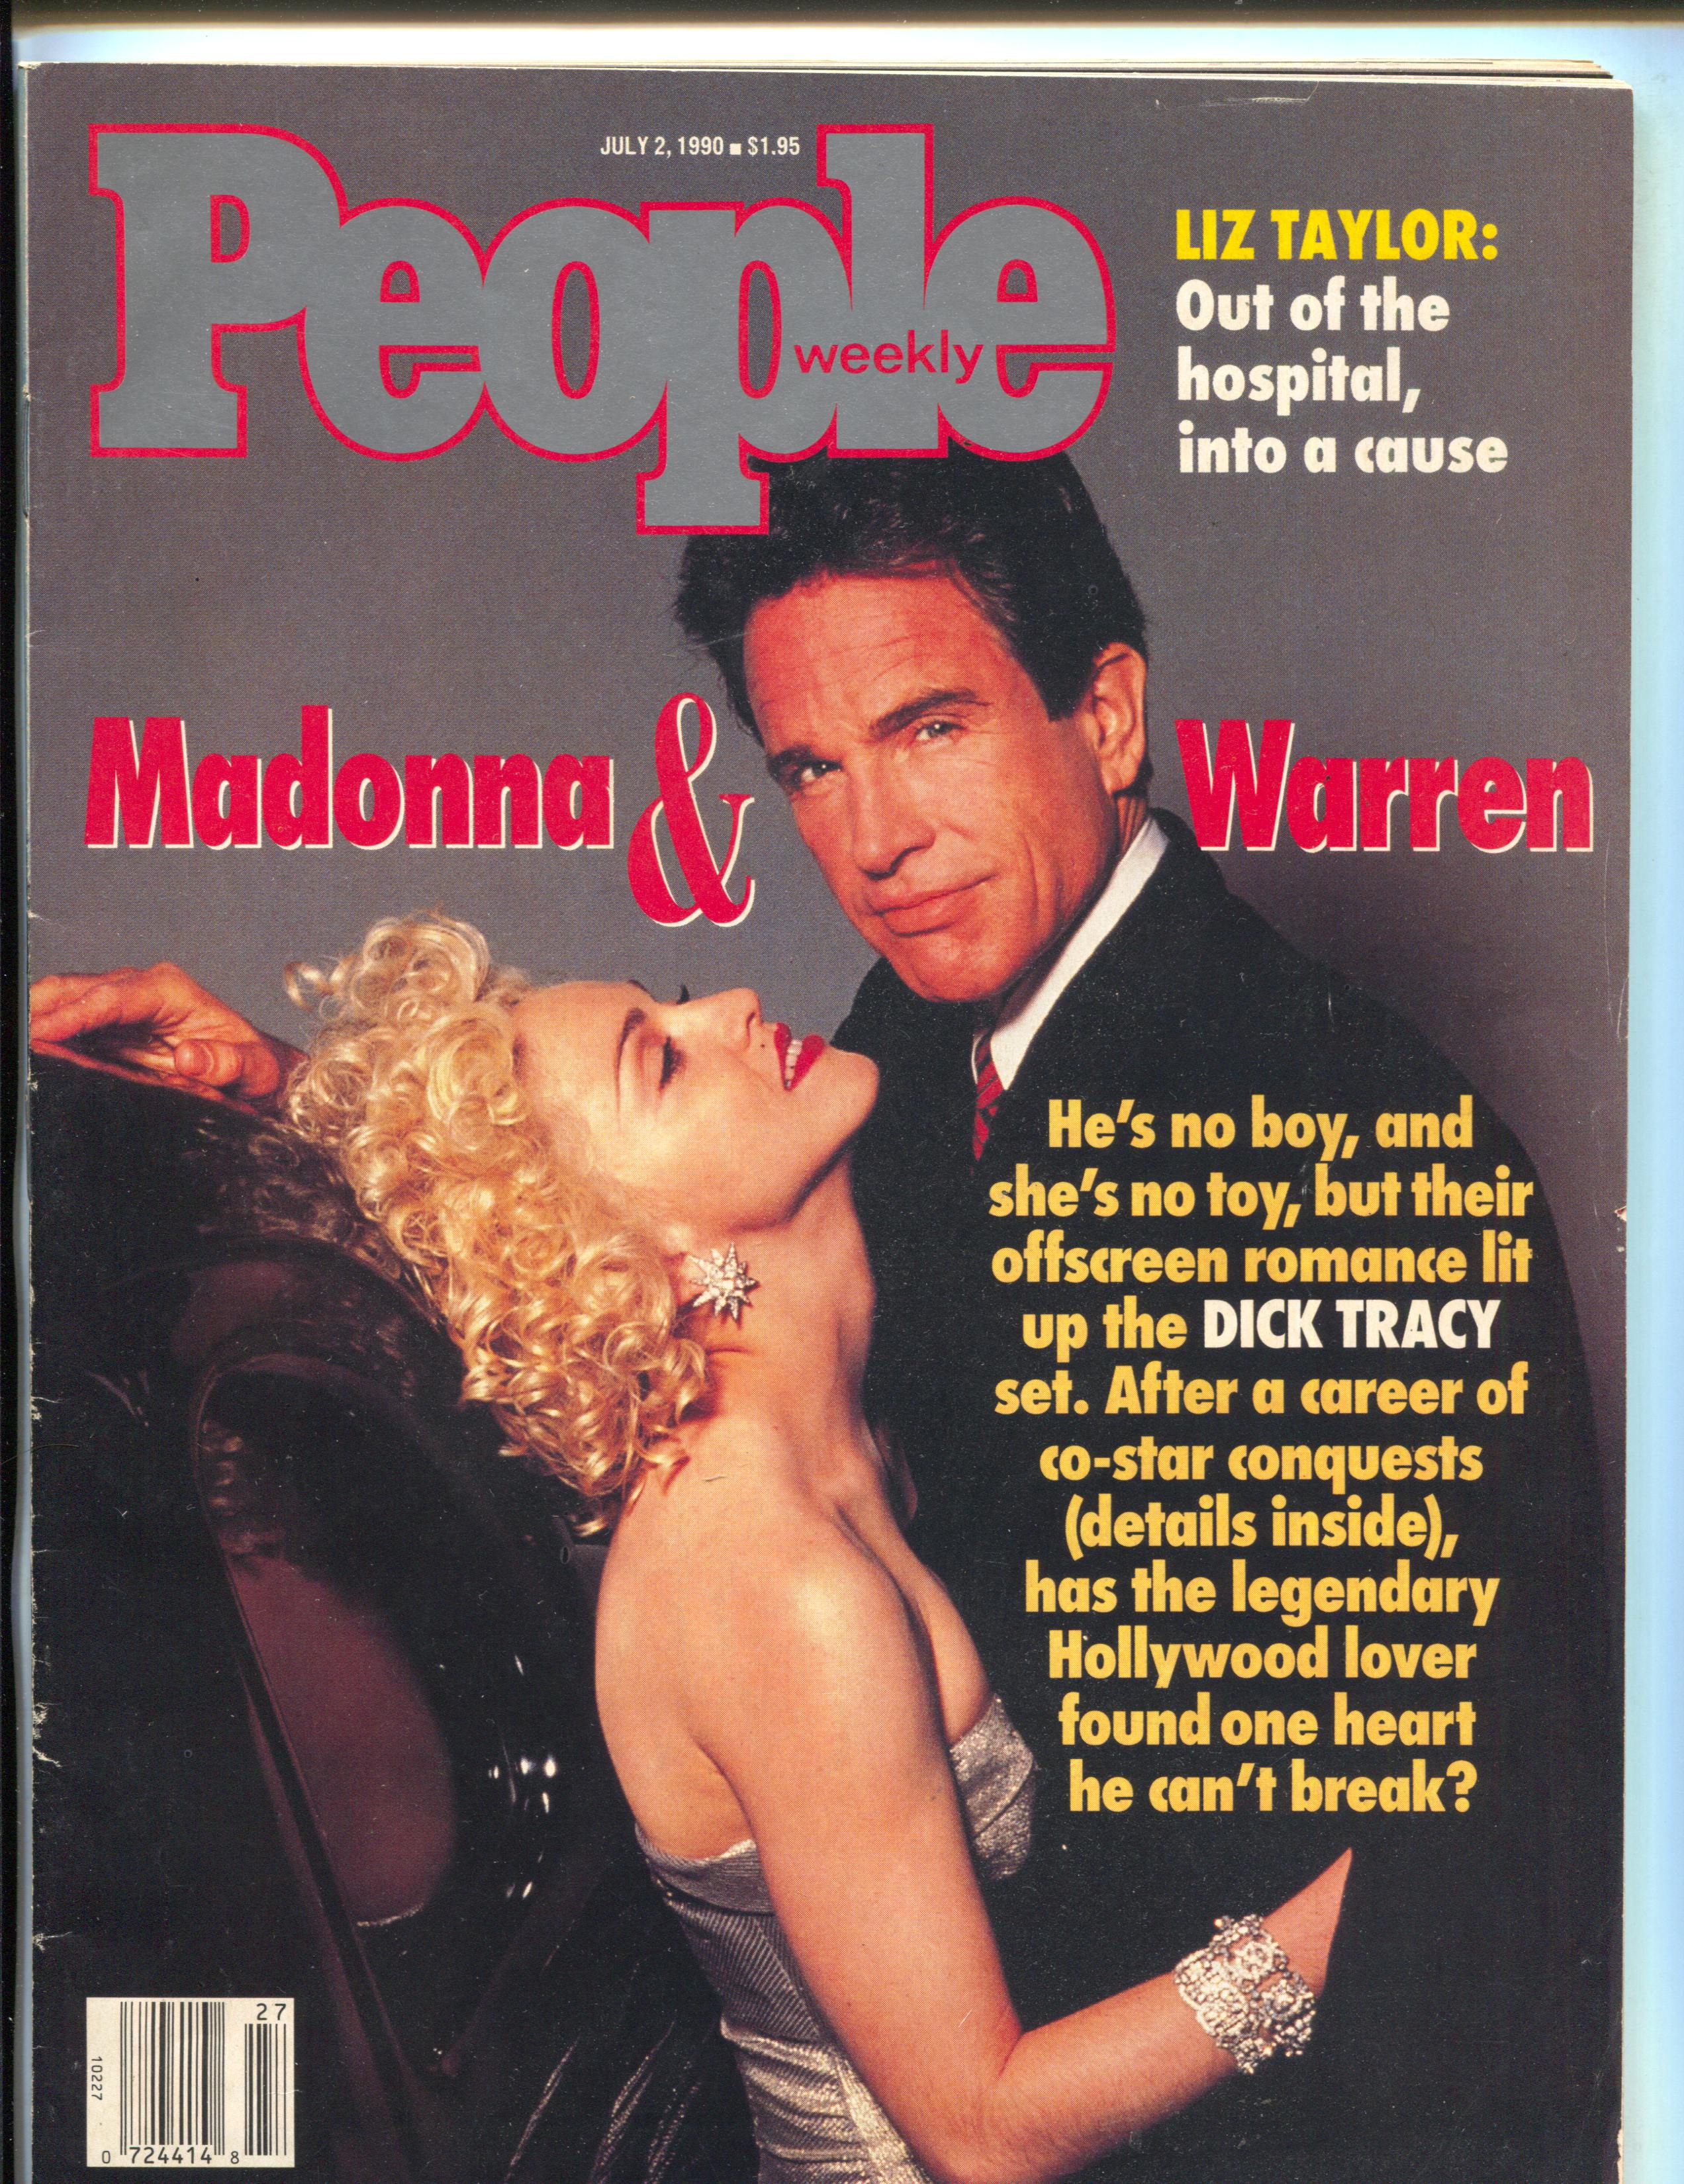 People Warren Beatty Madonna Dick Tracy 7 2 1980 1980 Magazine Periodical Dta Collectibles